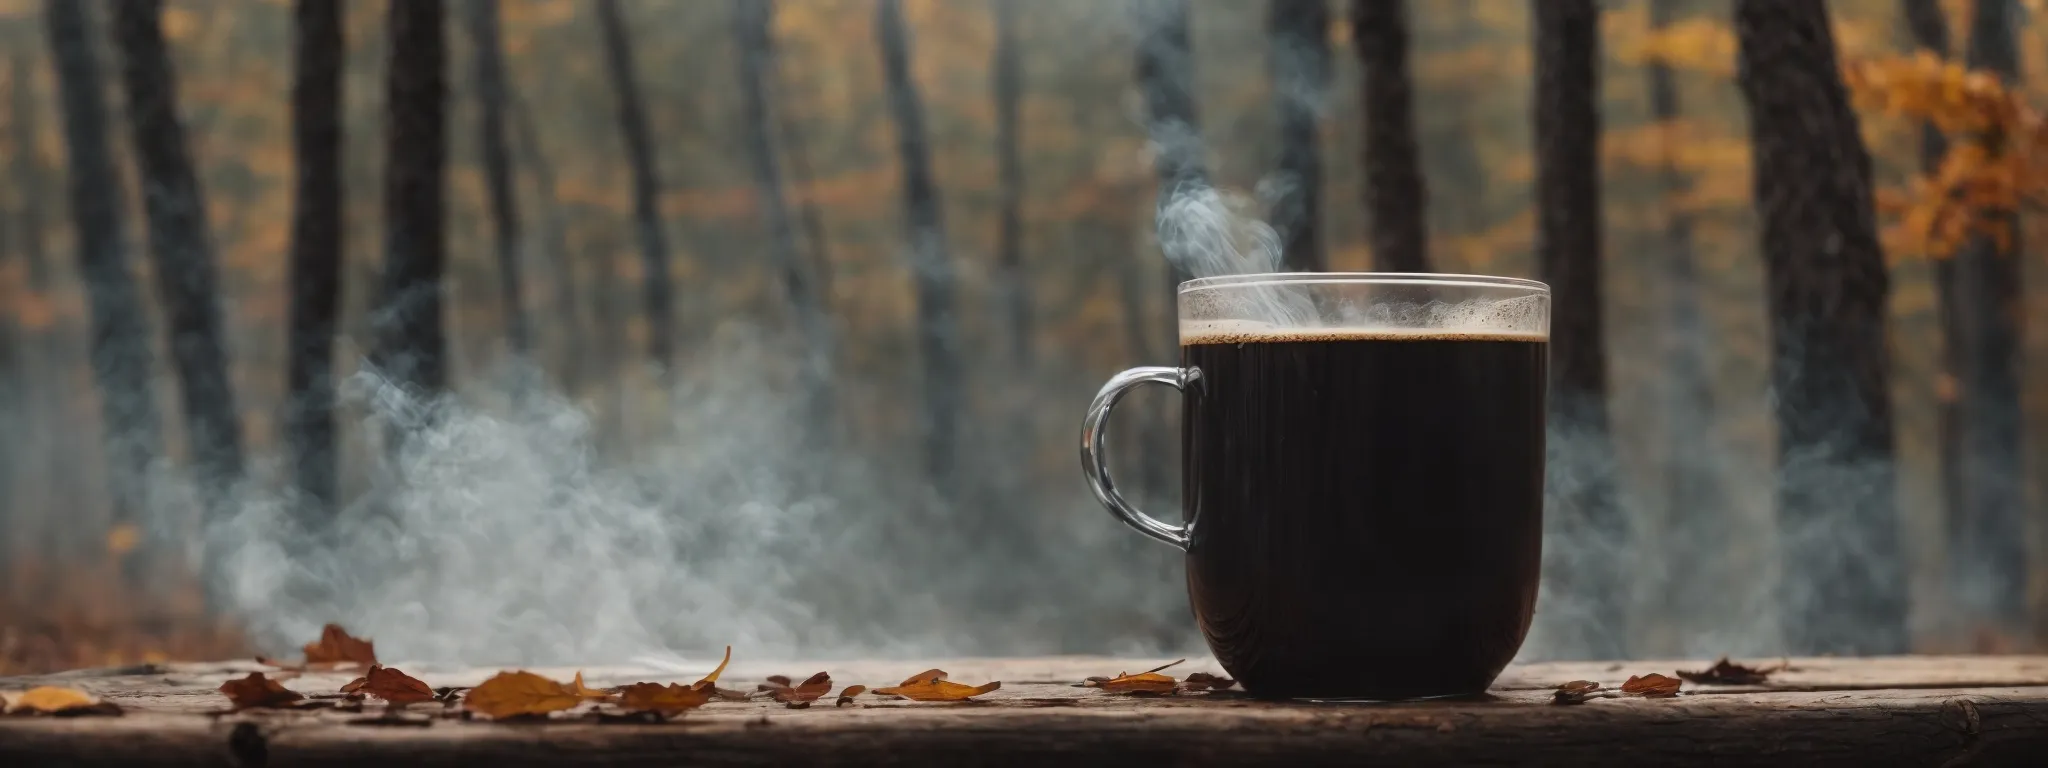 steaming coffee on a rustic wooden table with a blurry forest background in autumn.